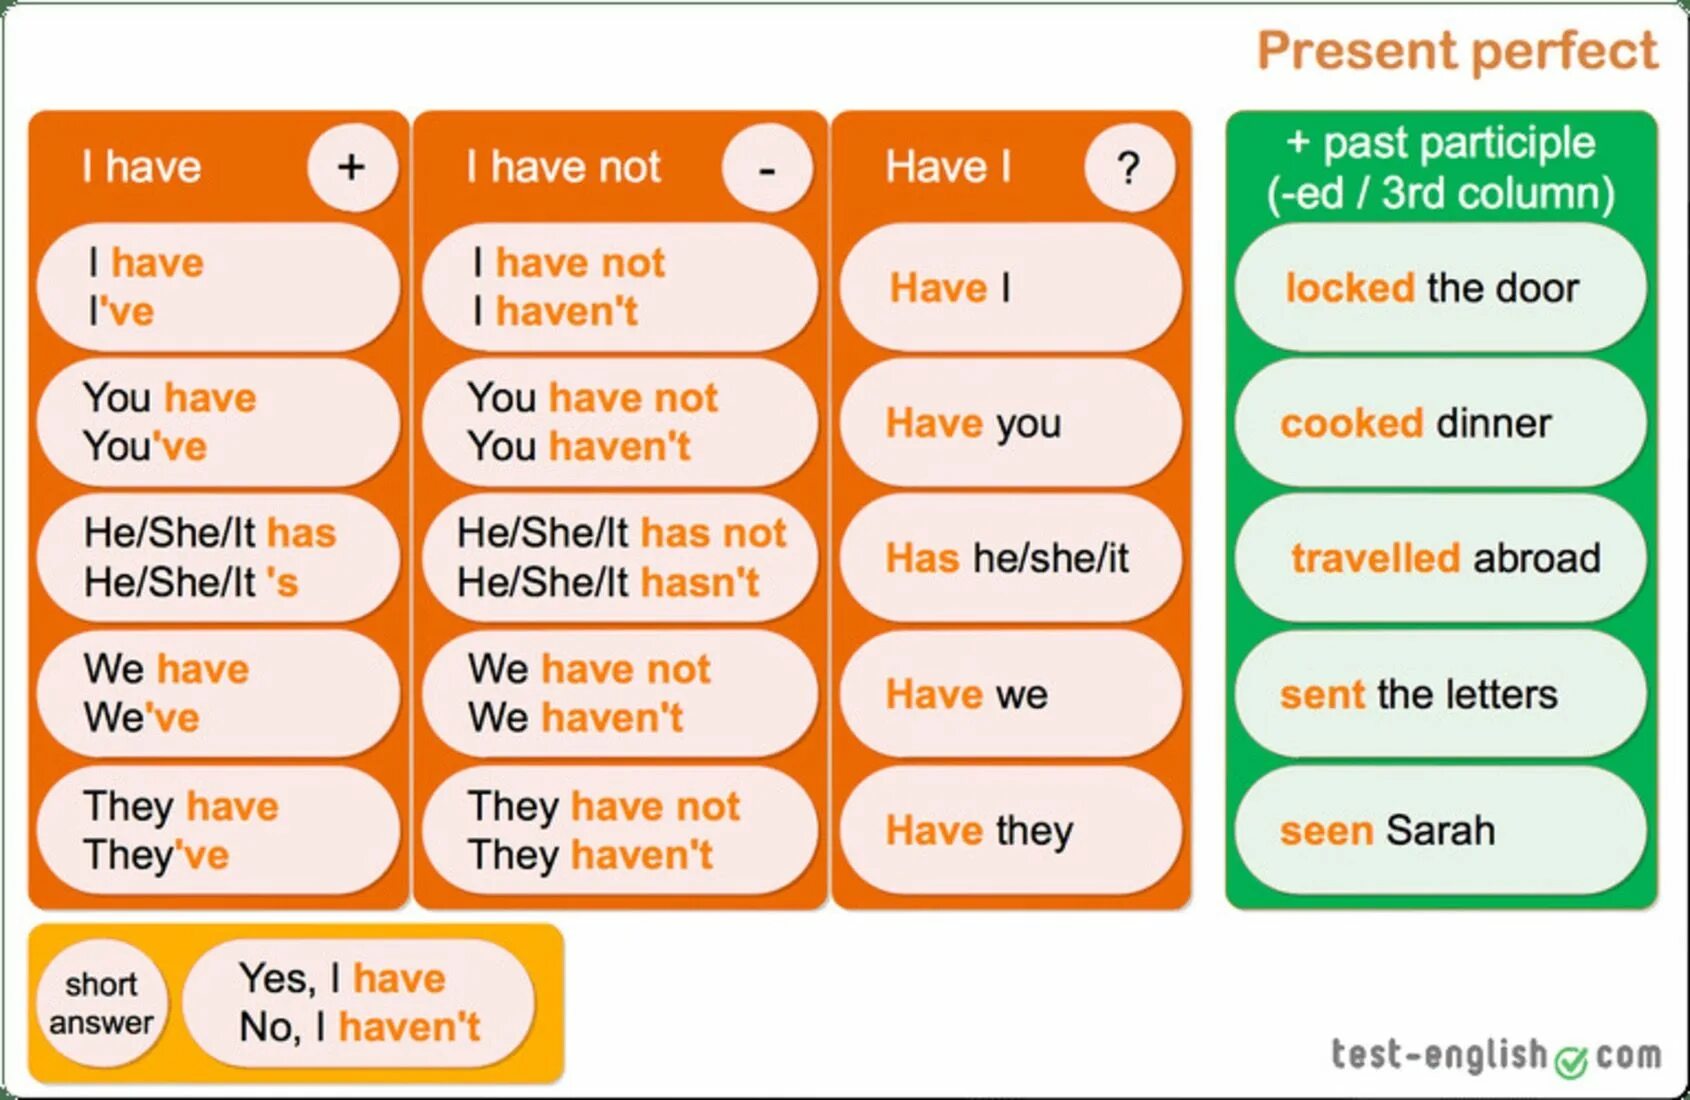 1 the perfect tense forms. Present perfect таблица. The perfect present. Present perfect табличка. Present perfect правило.